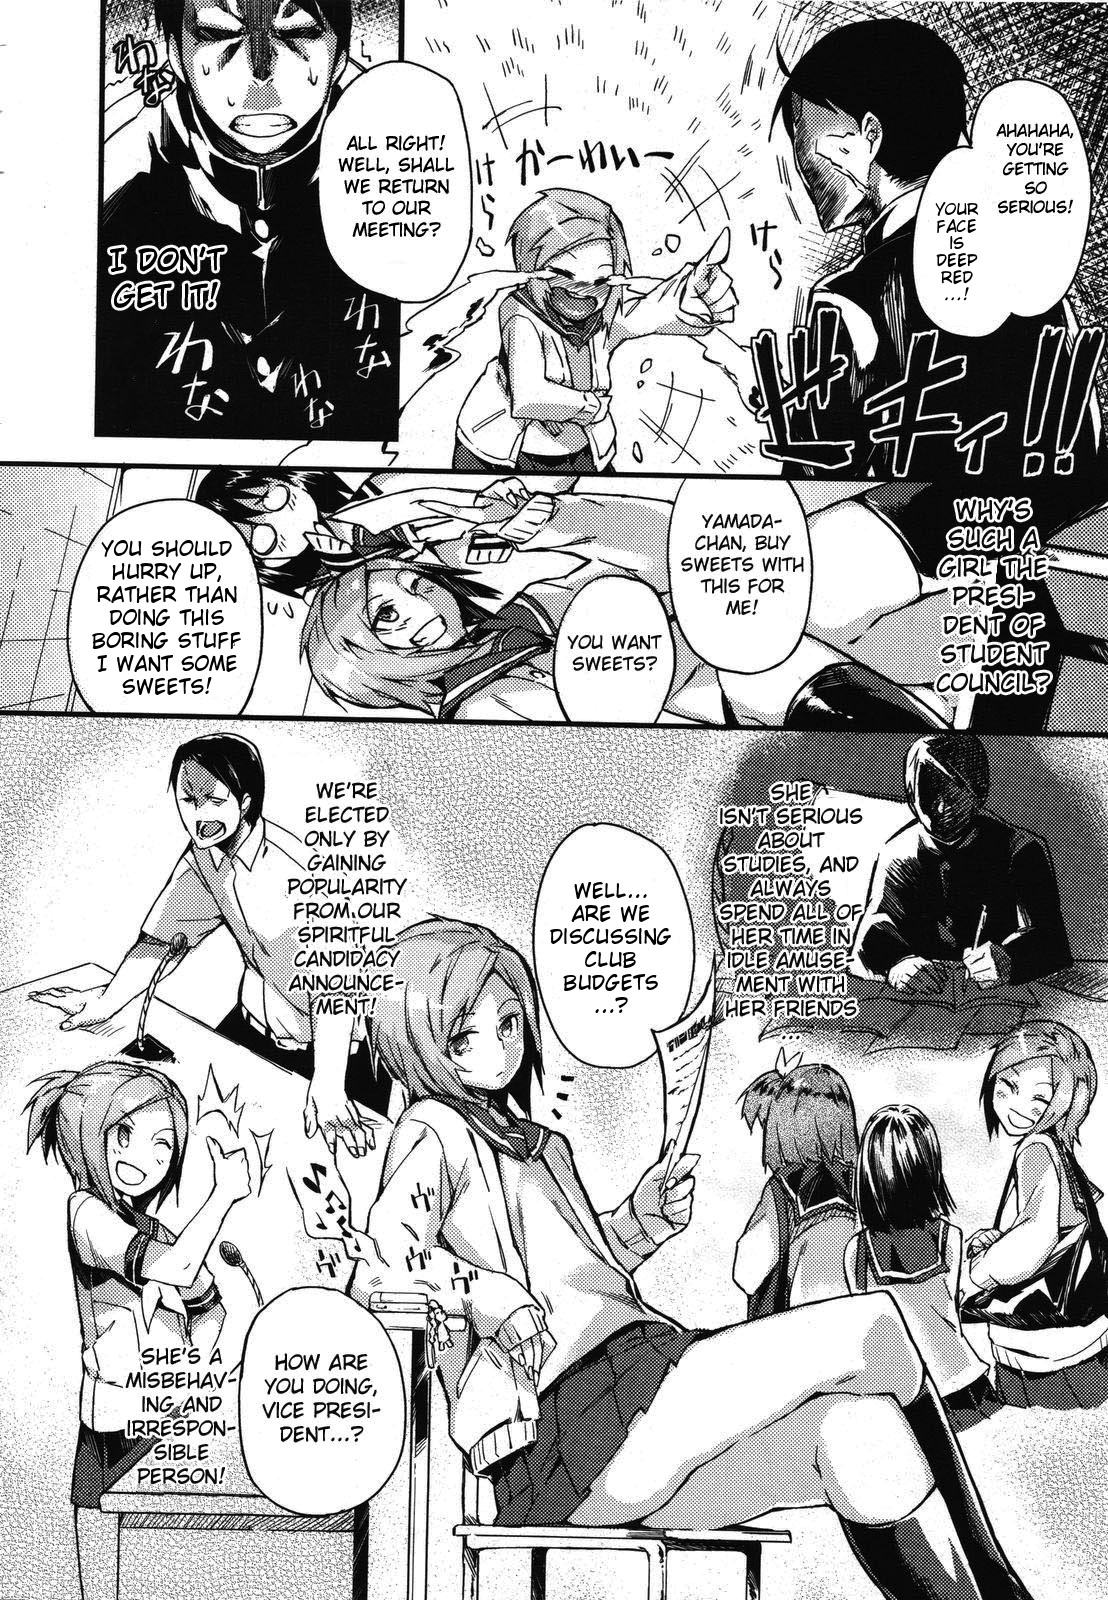 [Fujiya] The North Wind, the Sun and the Academy [Eng] {doujin-moe.us} page 4 full